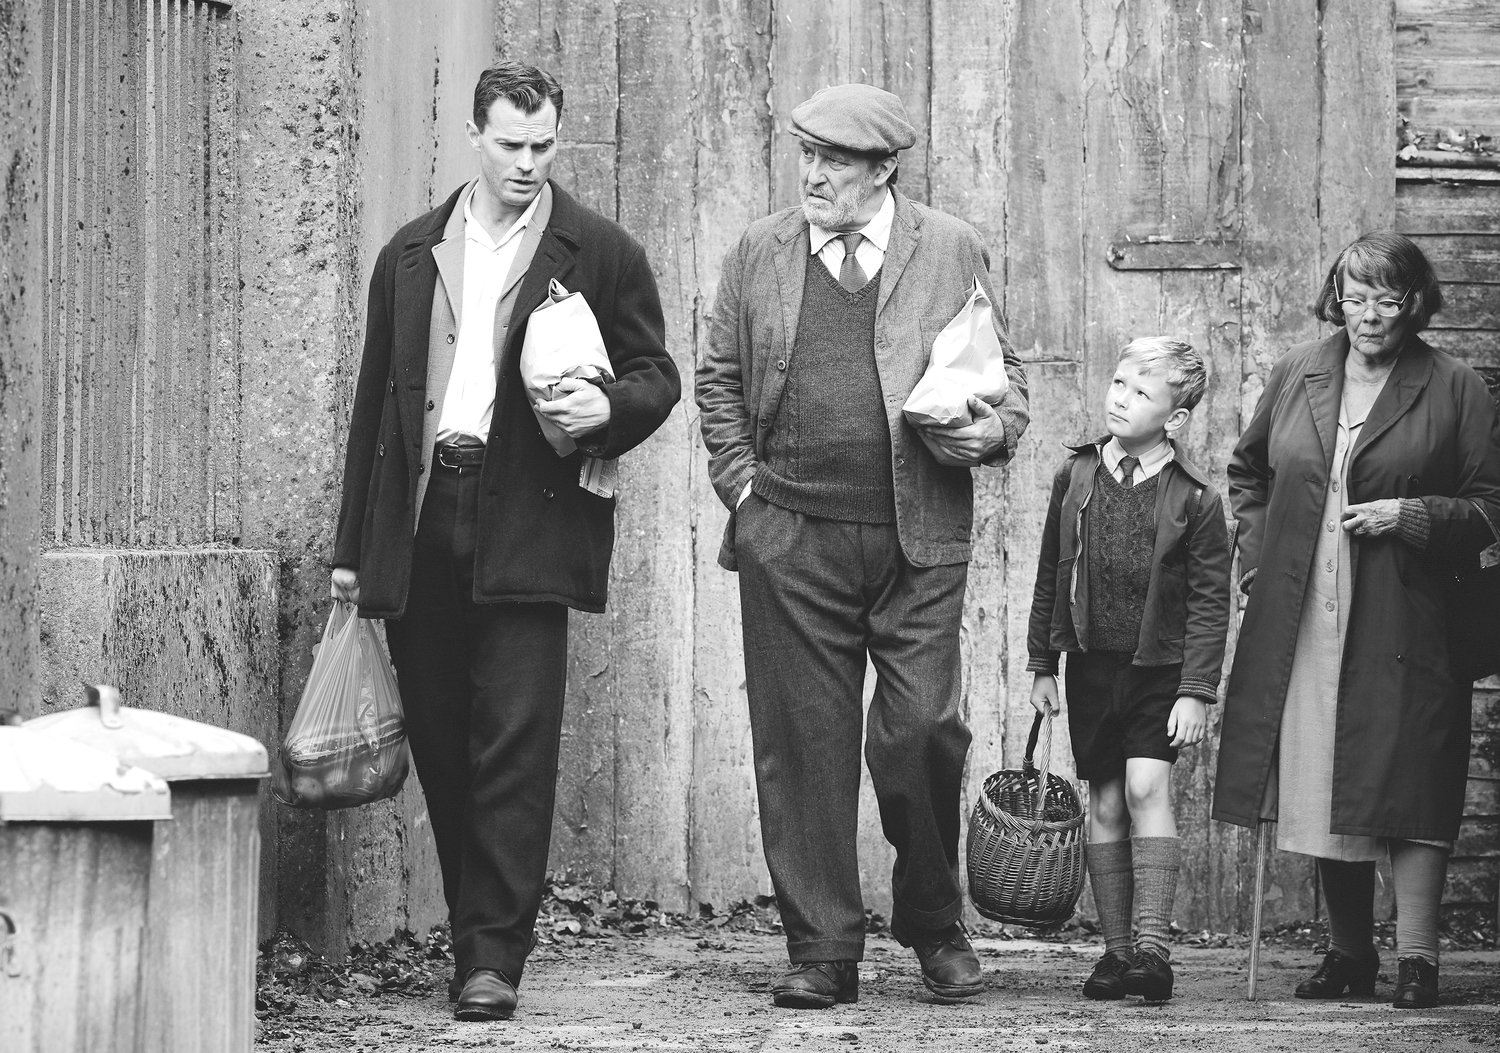 Poignant — From left, Jamie Dornan as “Pa”, Ciarán Hinds as “Pop”, Jude Hill as “Buddy”, and Judi Dench as “Granny” in a scene from “Belfast.”